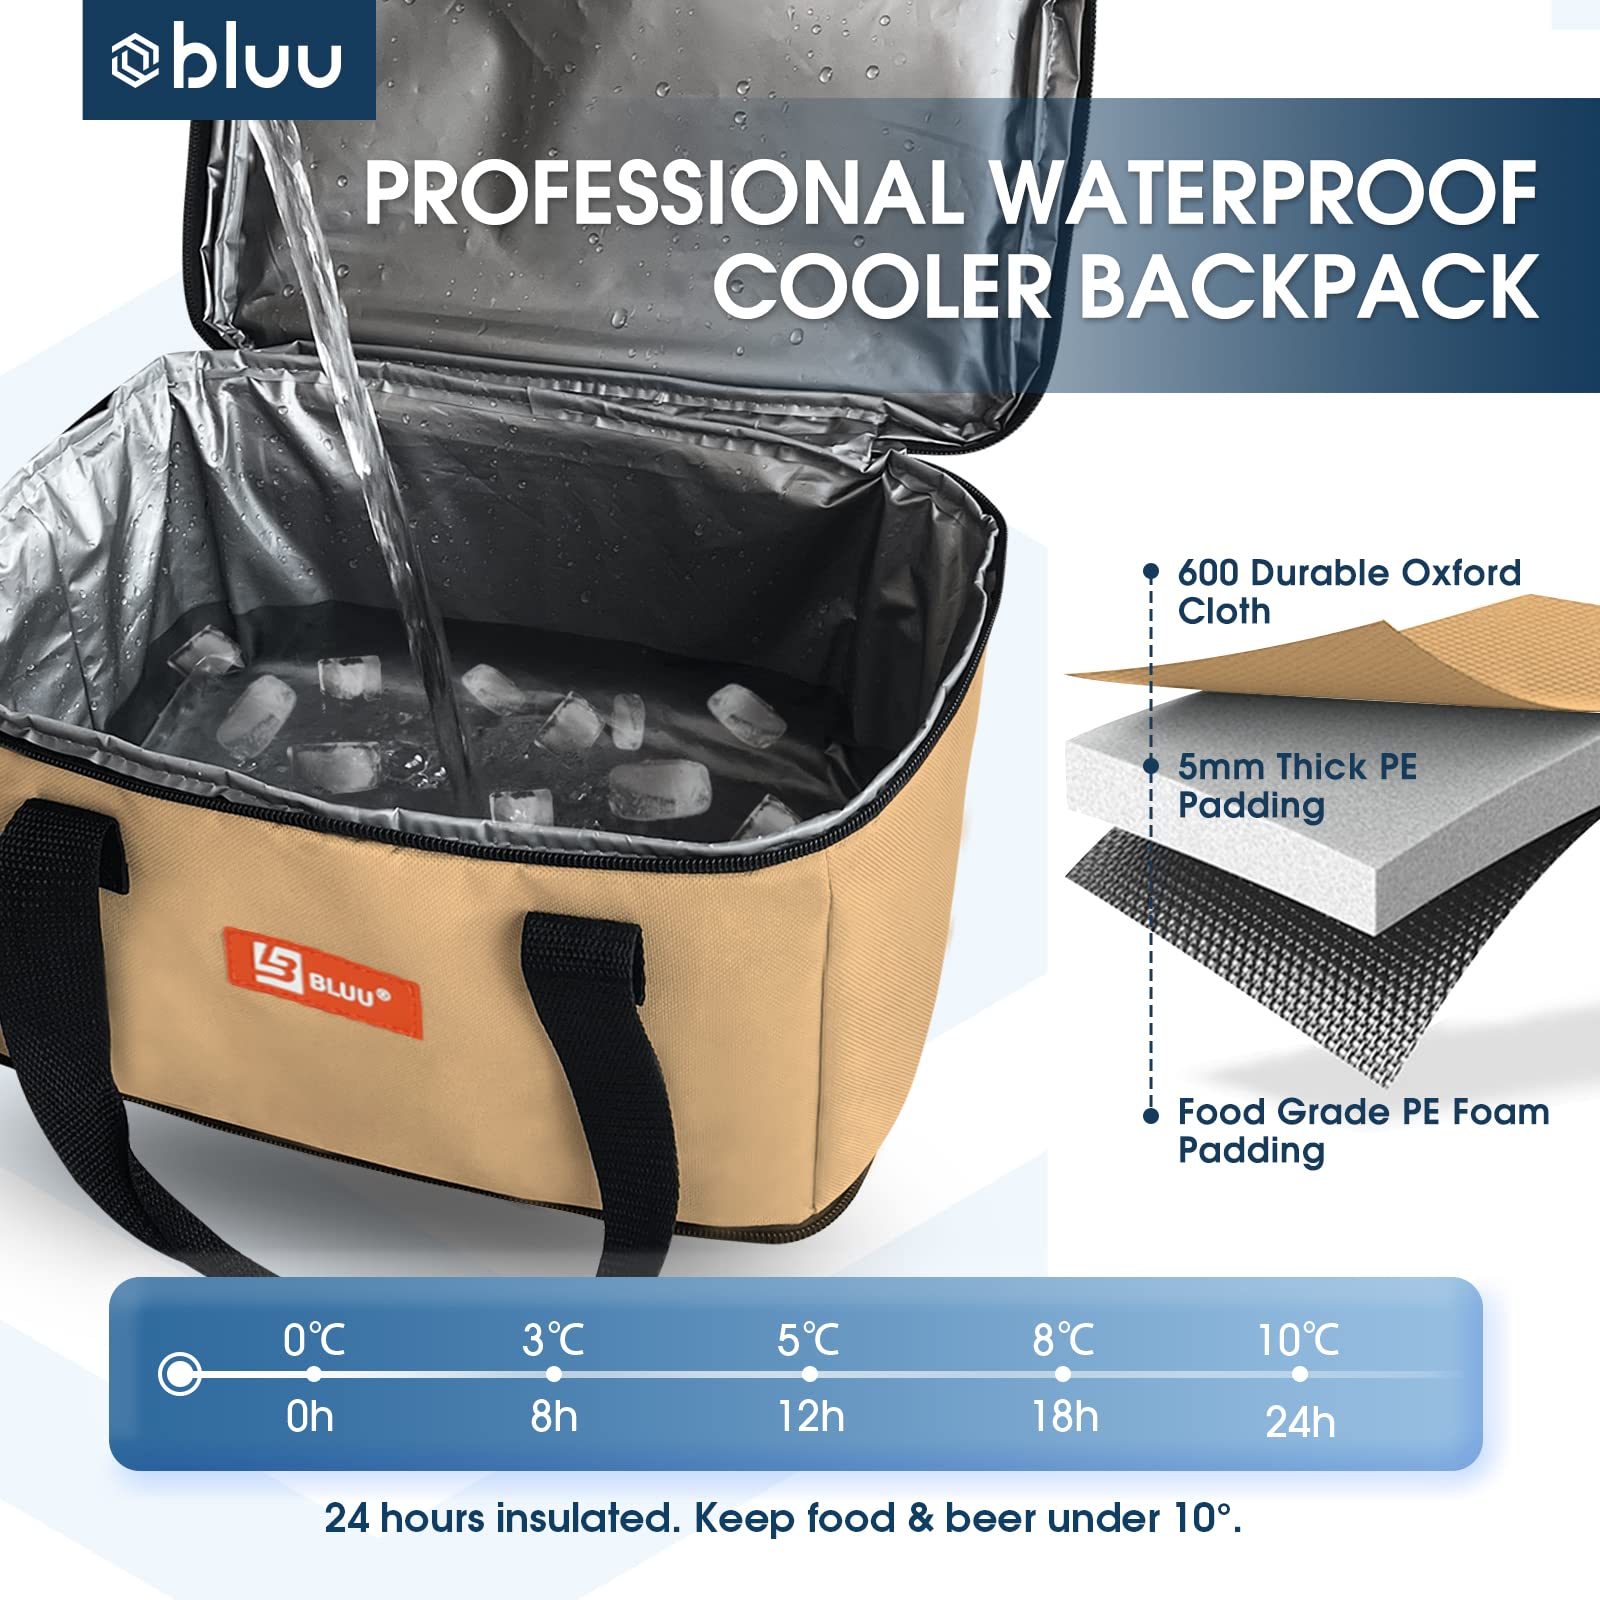 BLUU 2-in-1 Patent Innovation 60 Cans Backpack Cooler & Cooler Bag ,Waterproof & Leakproof Insulated Cooler Backpack Double Decker Large Lunch for Men Women,Soft Coolers for Camping, Beach, Picnic